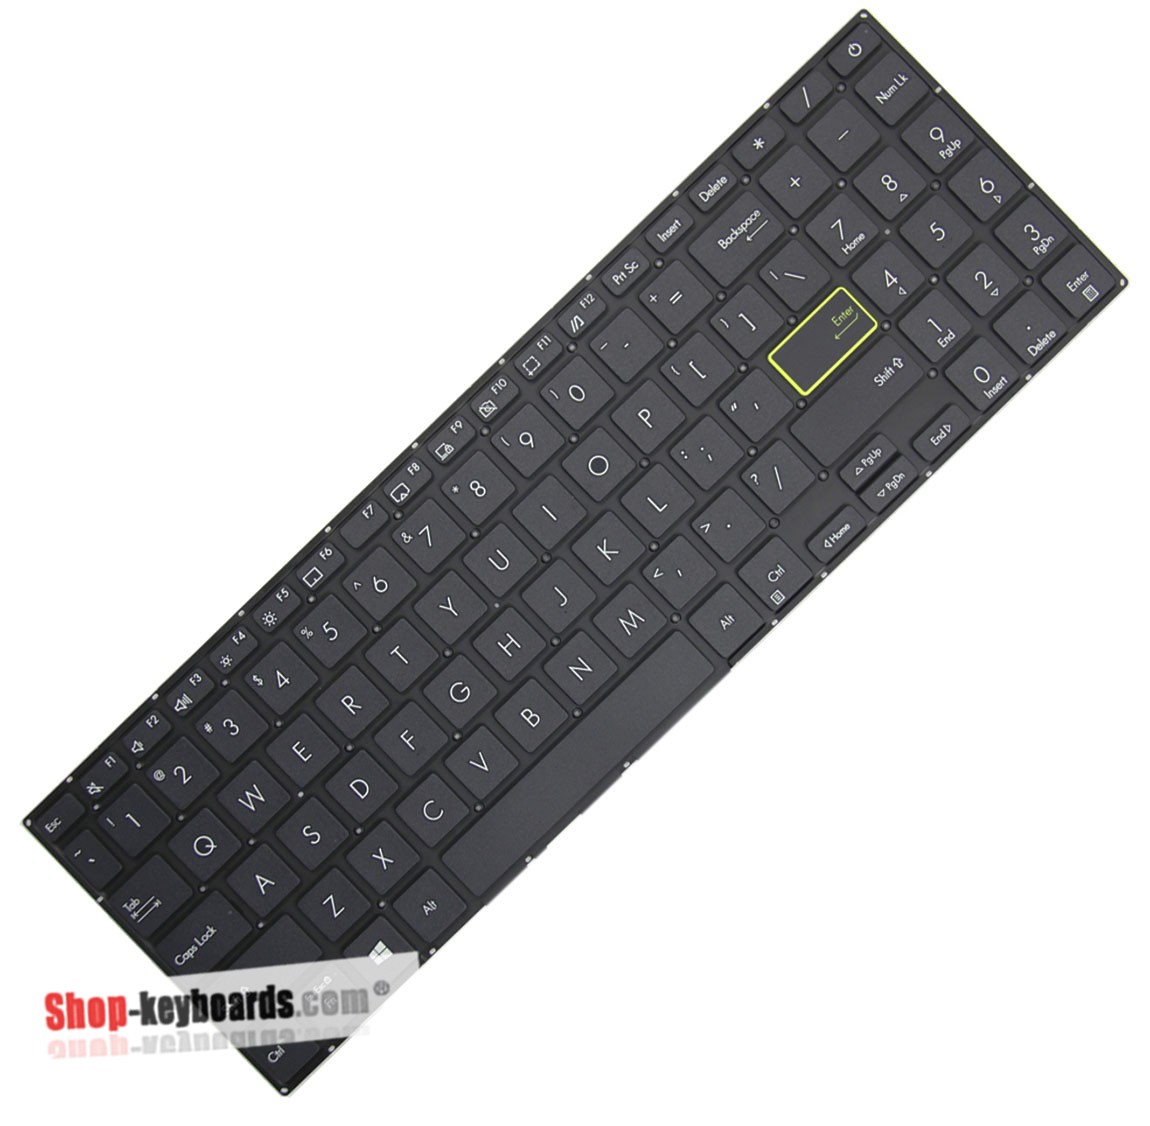 Asus 0KNB0-560KPO00  Keyboard replacement